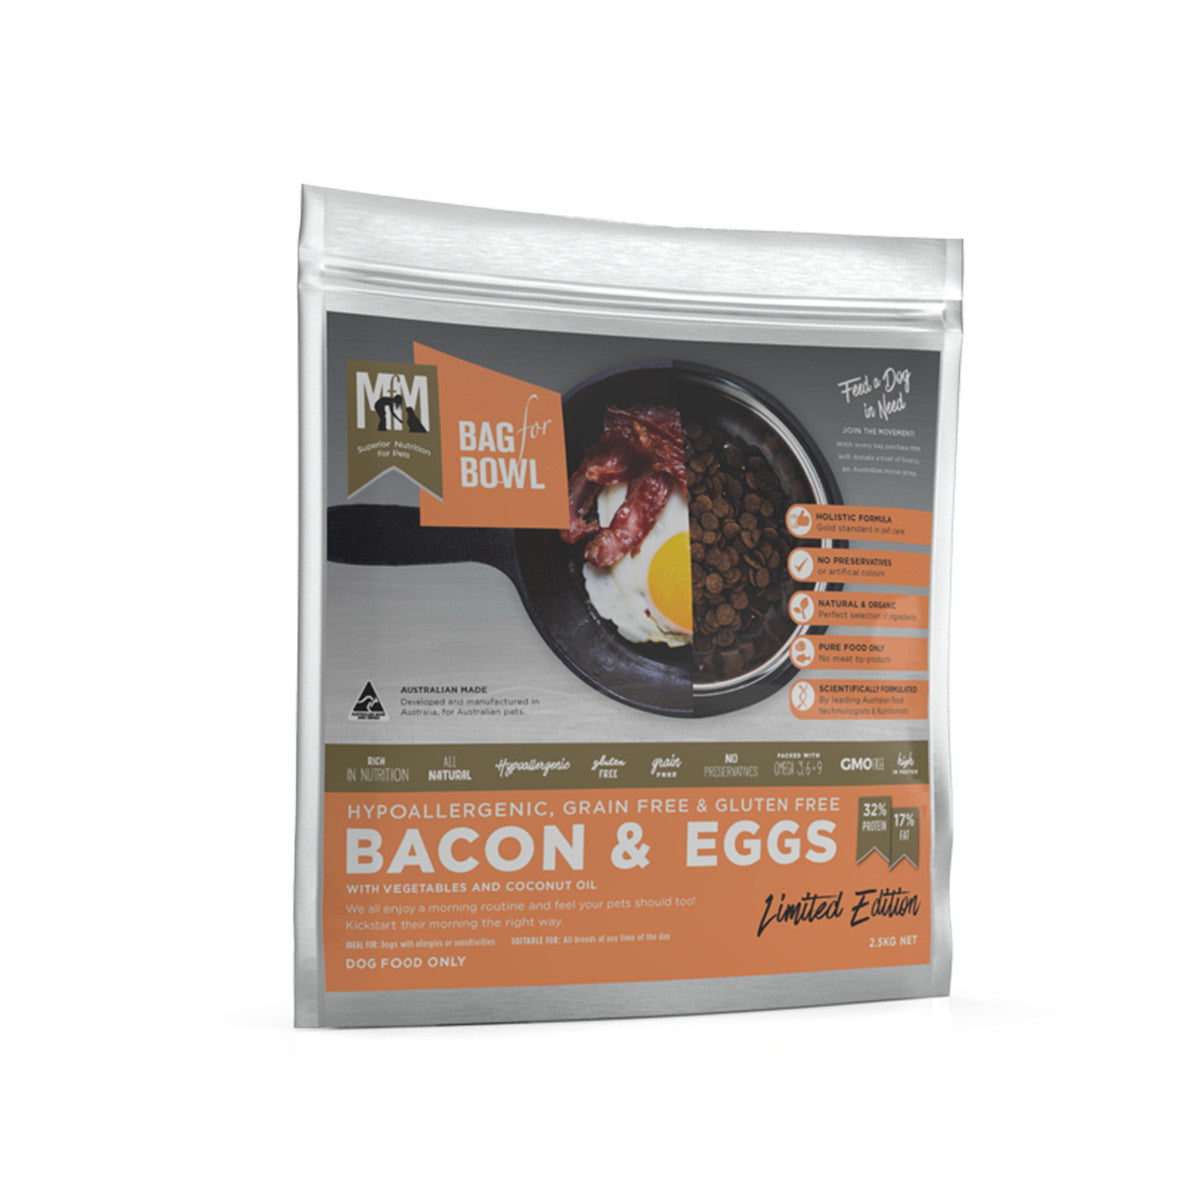 Meals for Mutts Grain Free Bacon & Eggs Dry Dog Food 2.5kg.